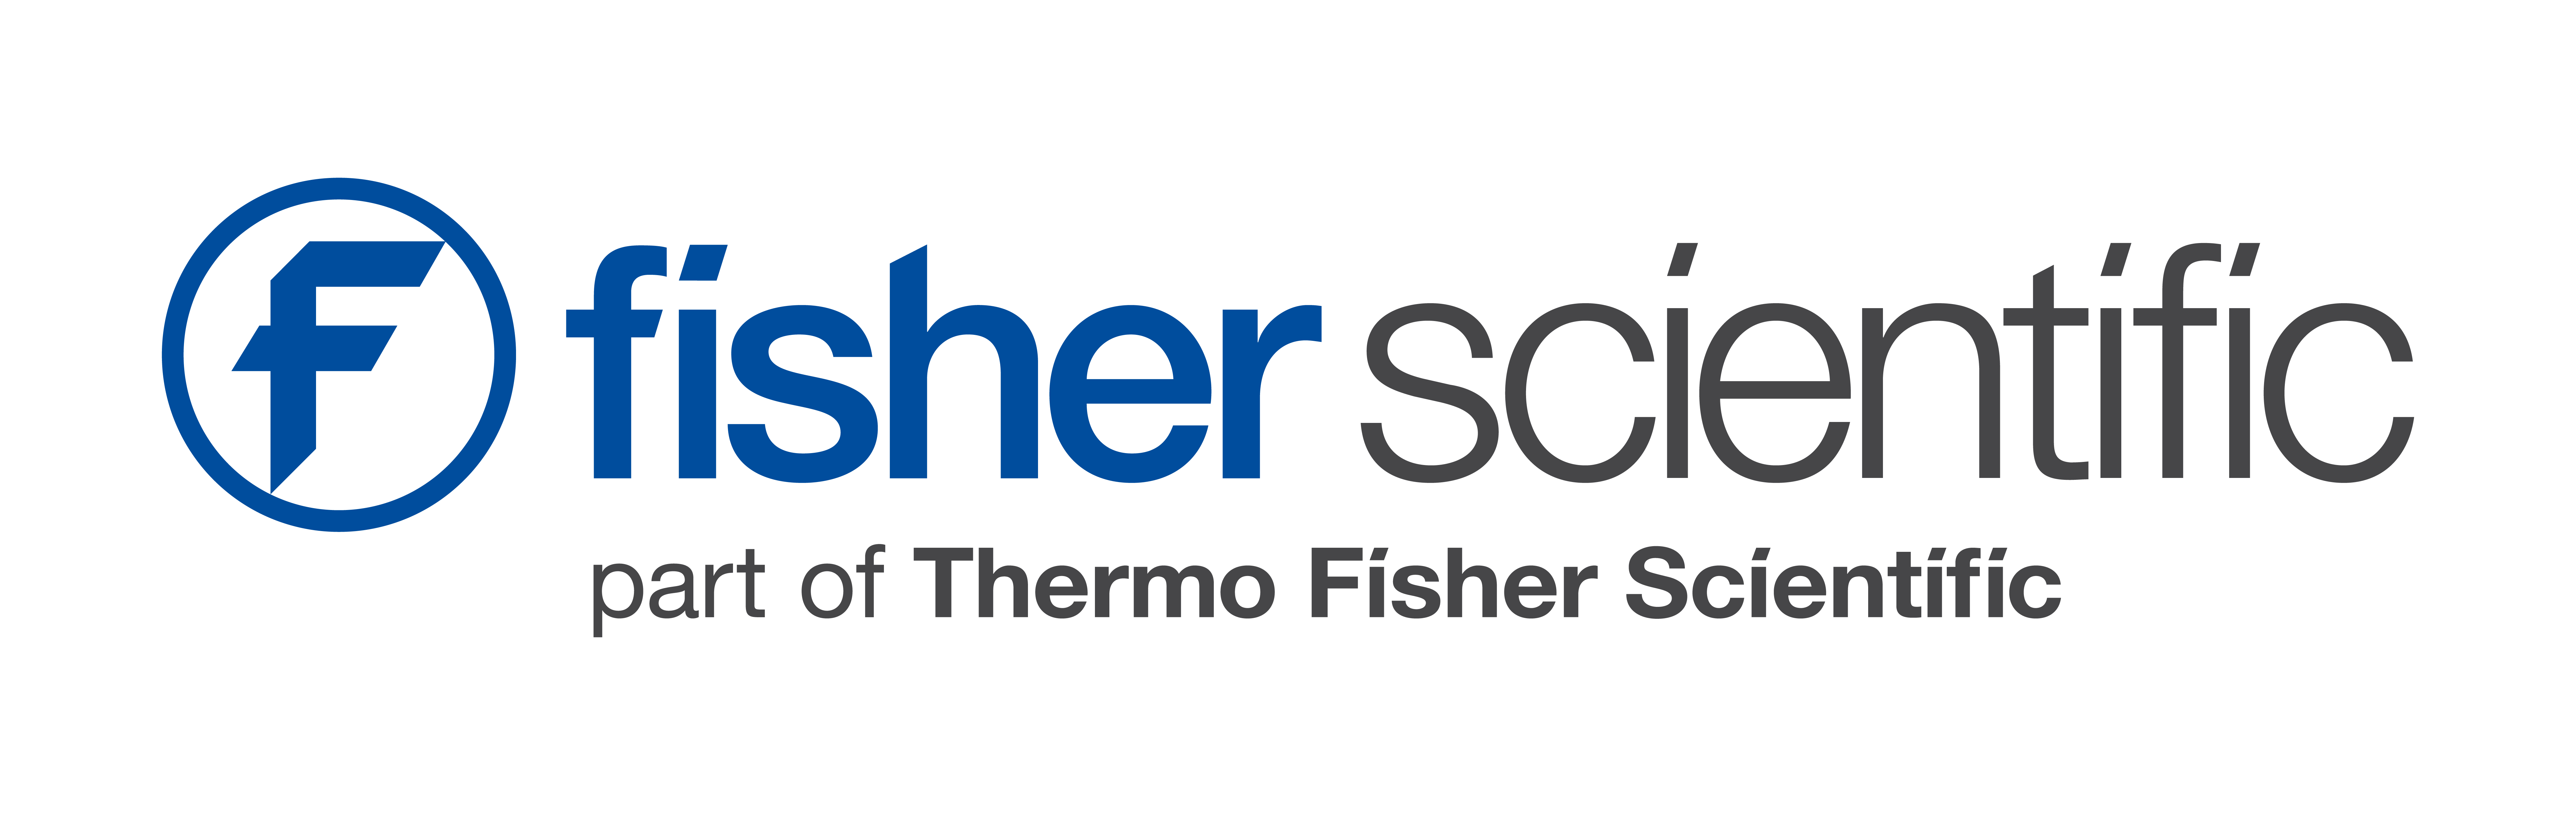 2022-07/fisher_scientific_tag.png